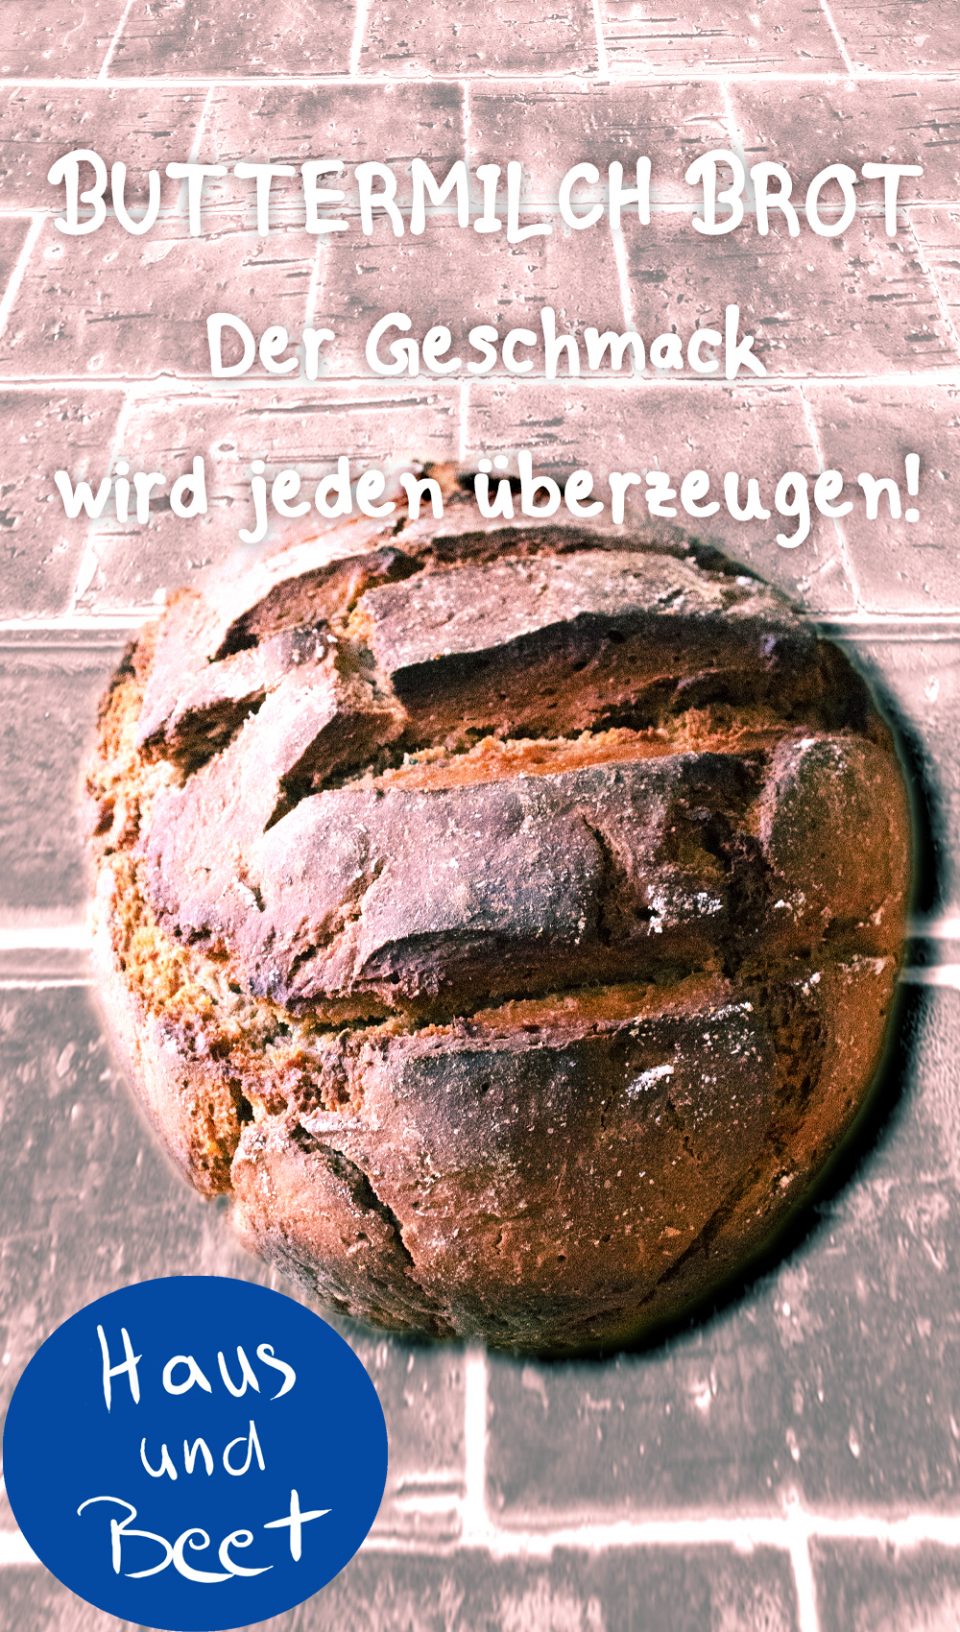 Buttermilch Brot